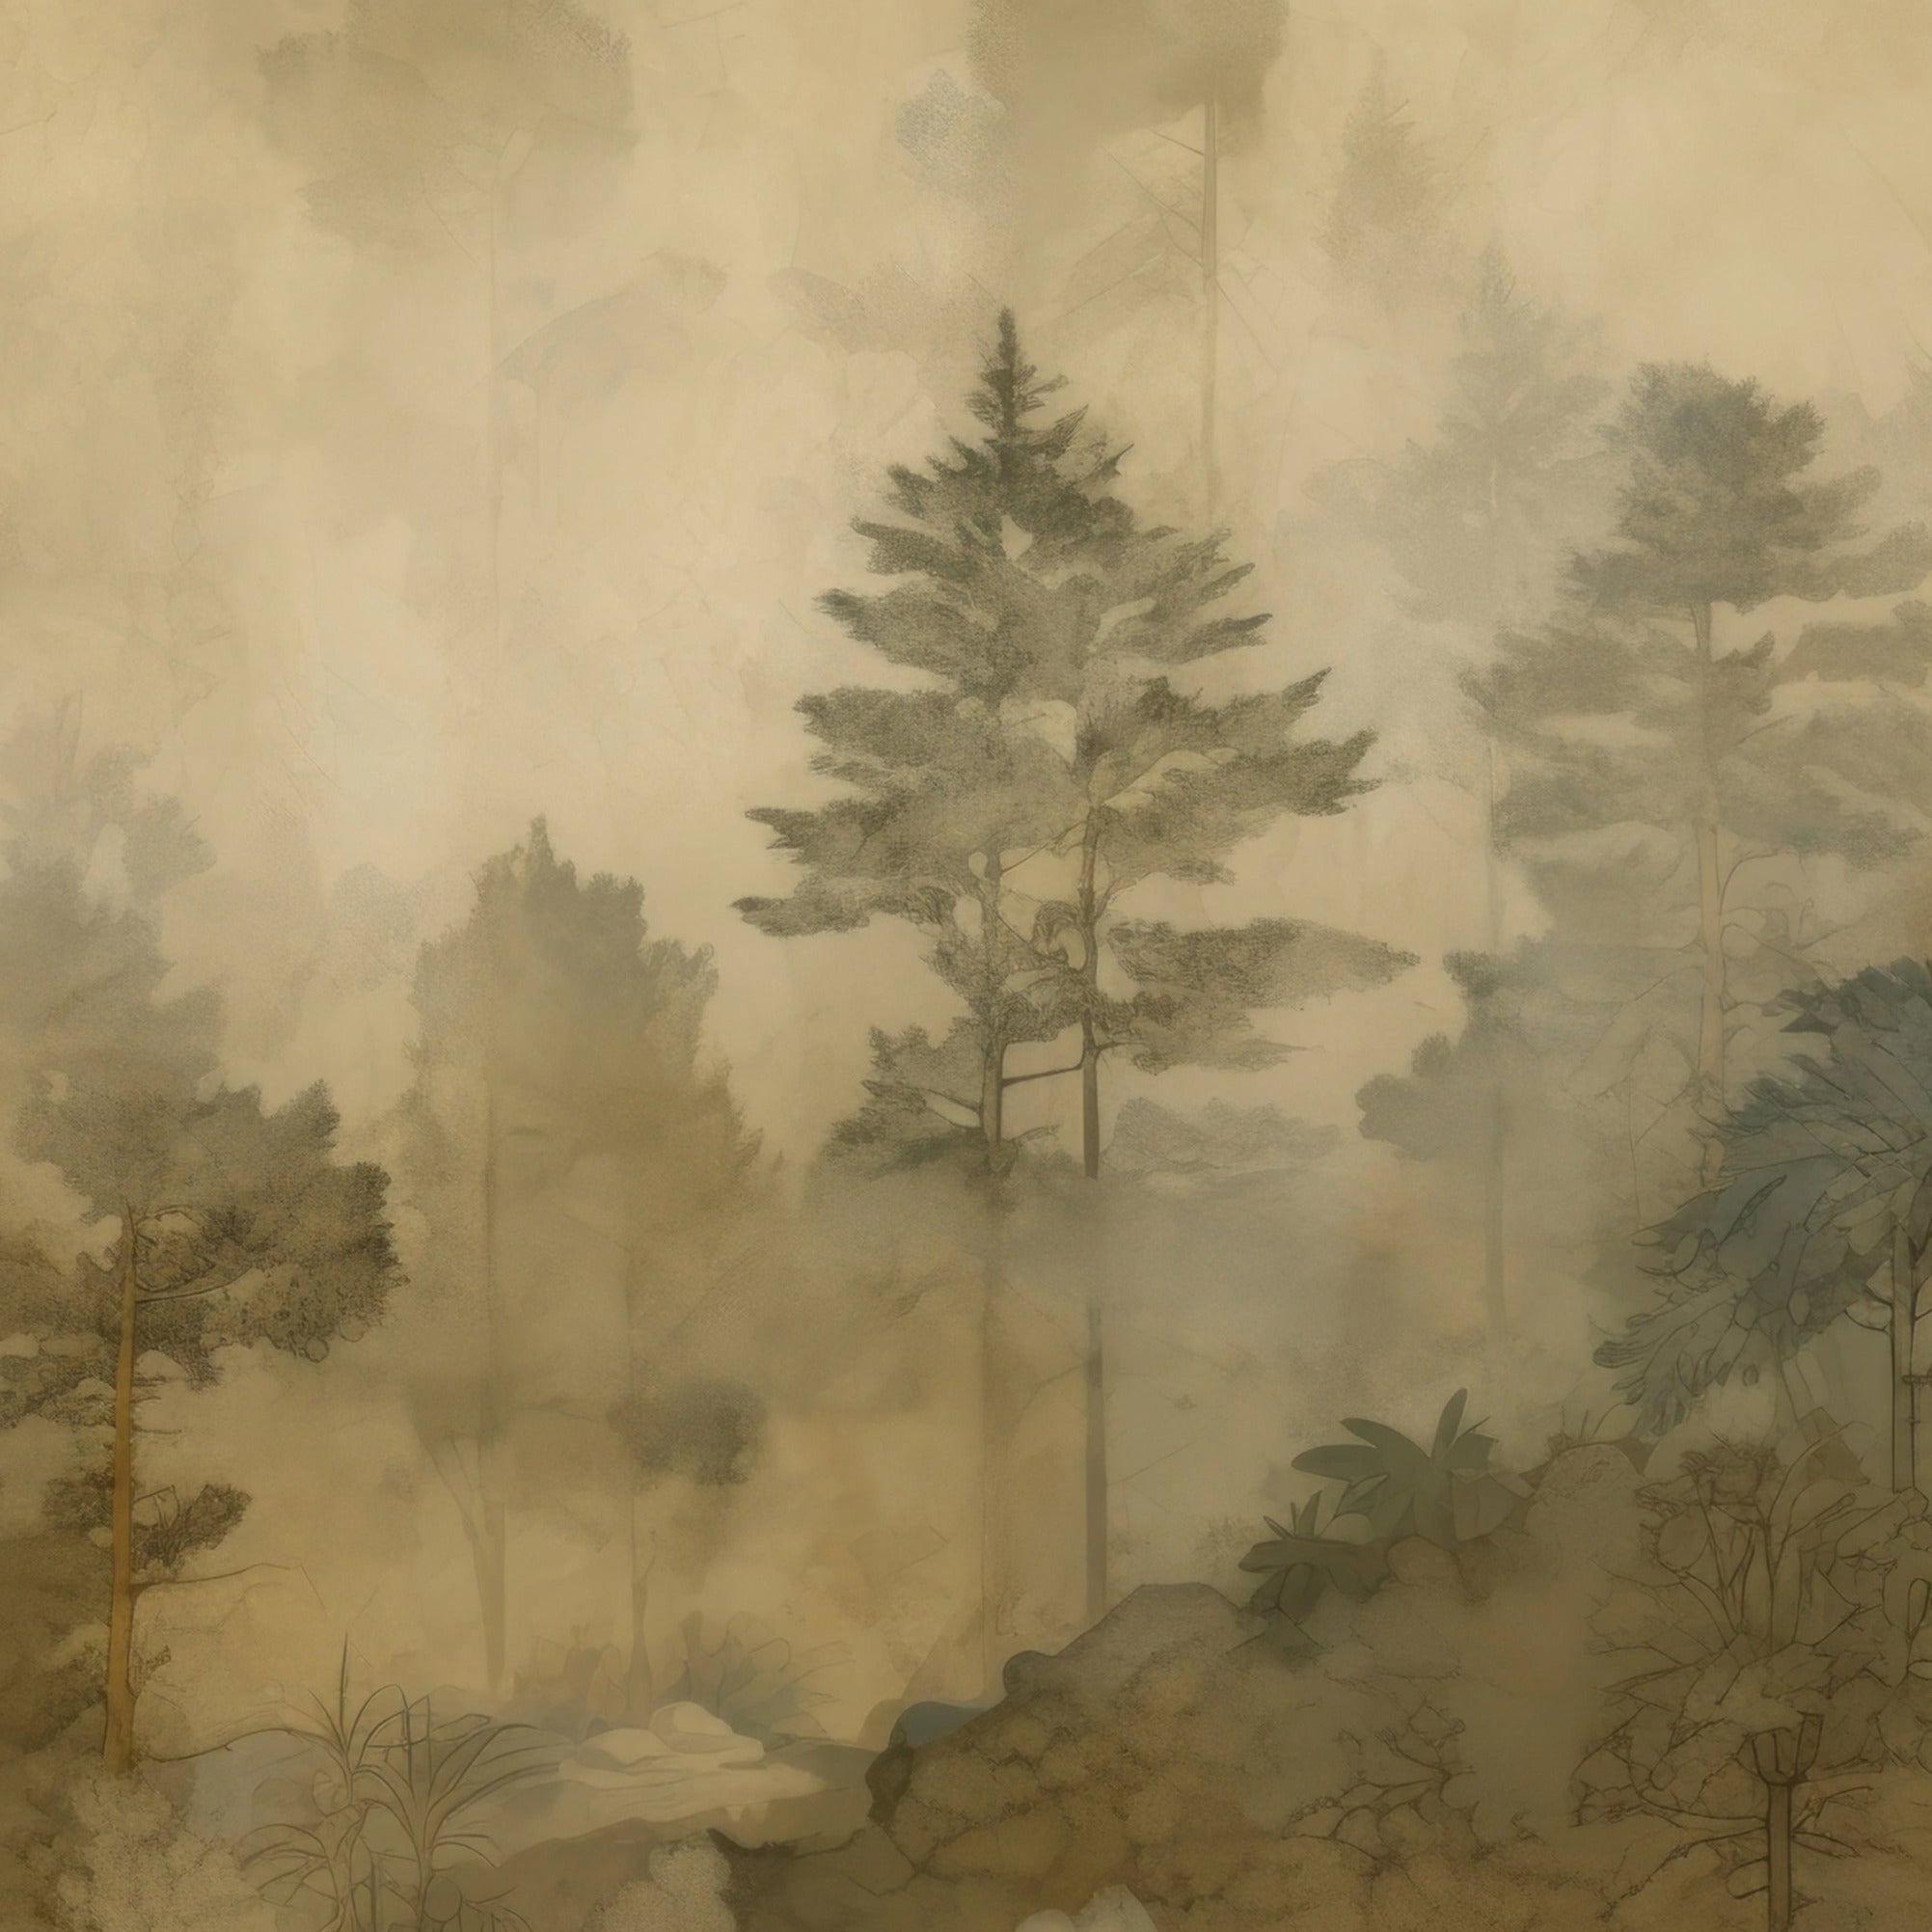 Artistic depiction of a dense, misty forest in sepia tones on a mural, evoking the tranquility of Algonquin Provincial Park."